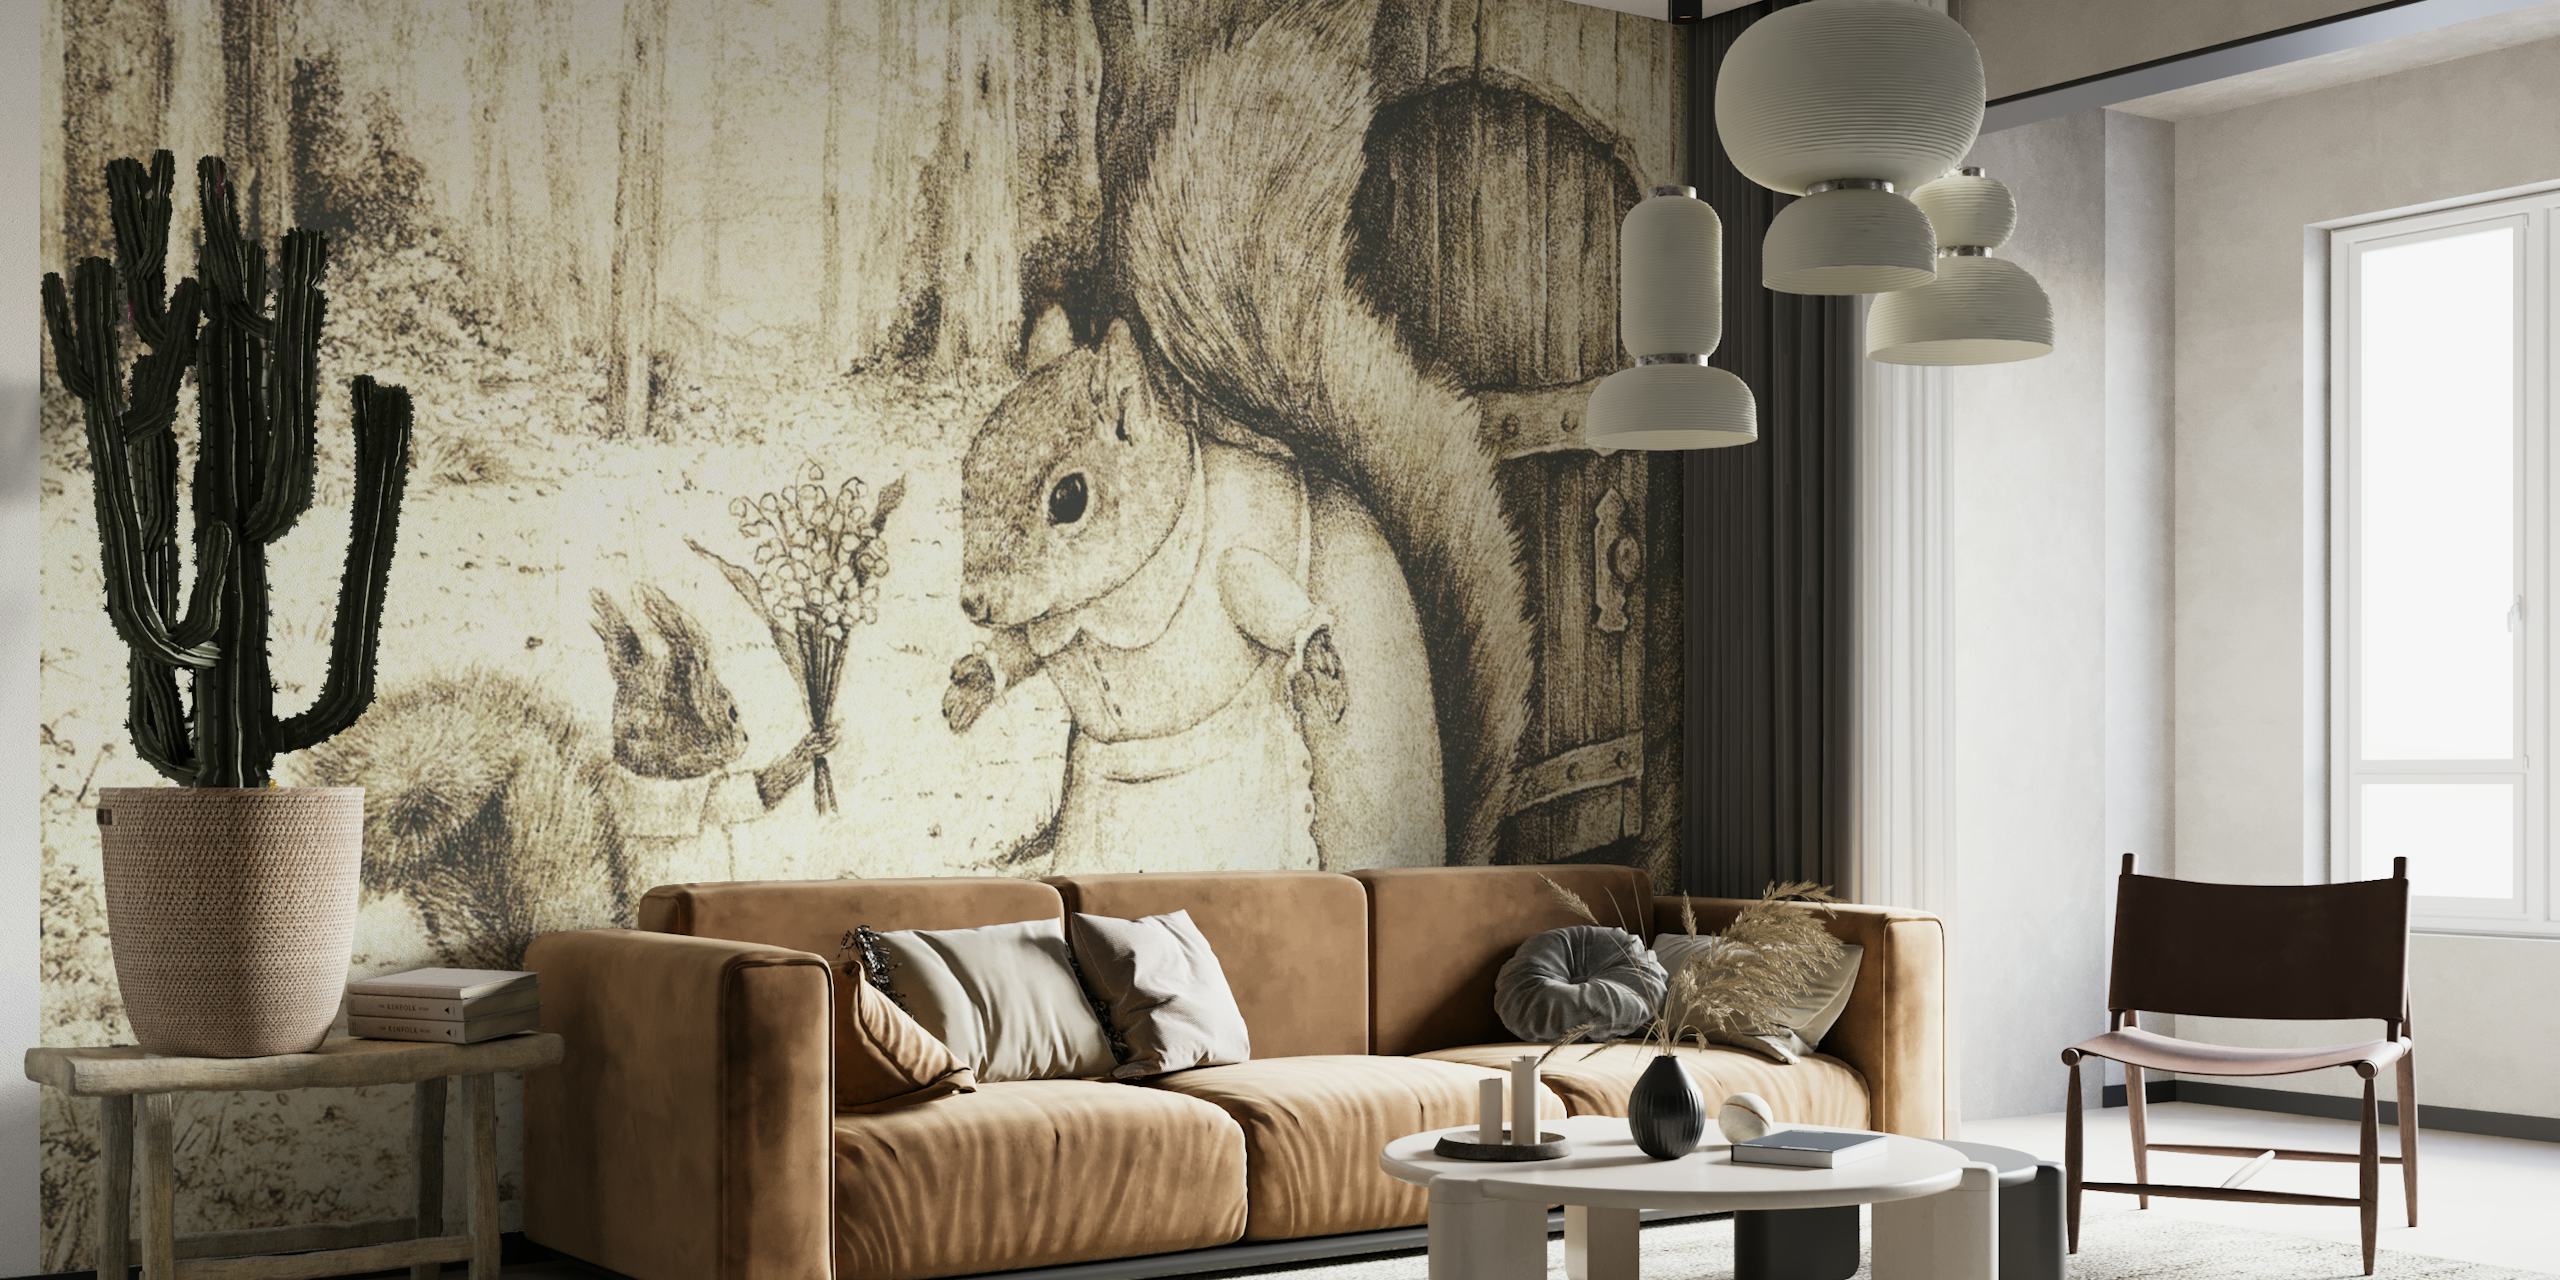 Sketch-style wall mural of a mother squirrel with her young on Happywall.com